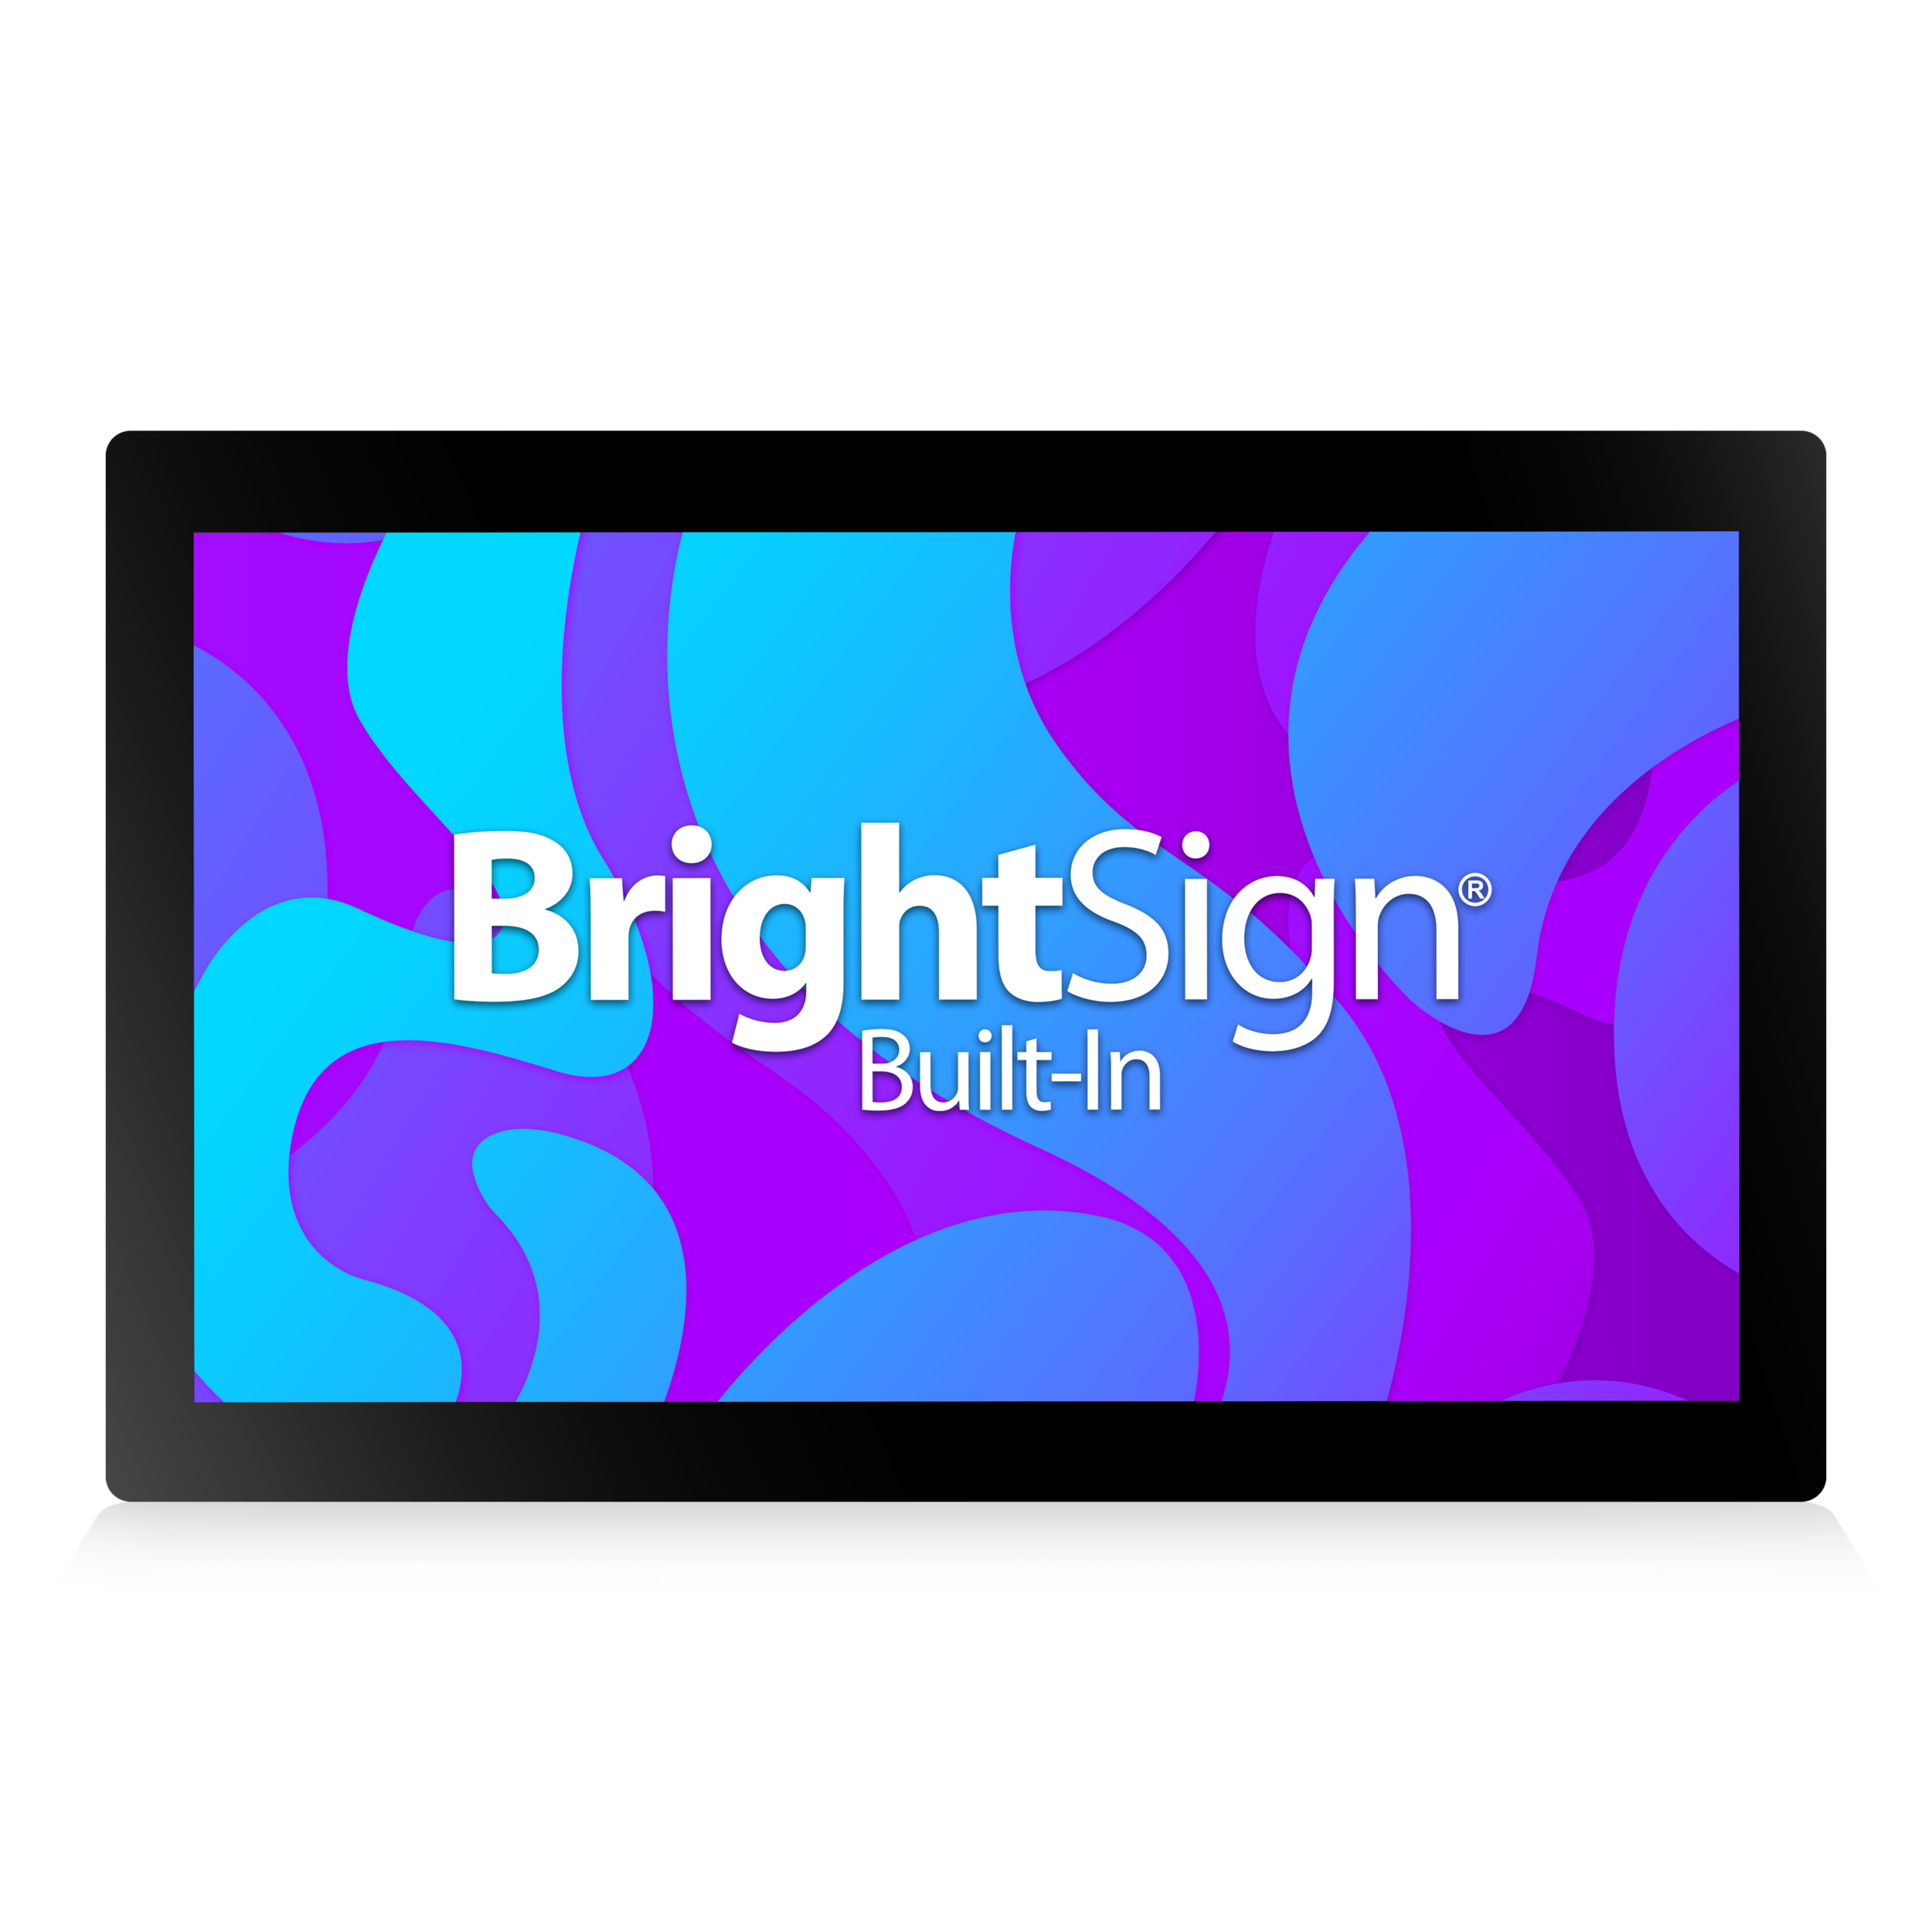 Bluefin - 32'' Touch Screen with BrightSign OS Built-In